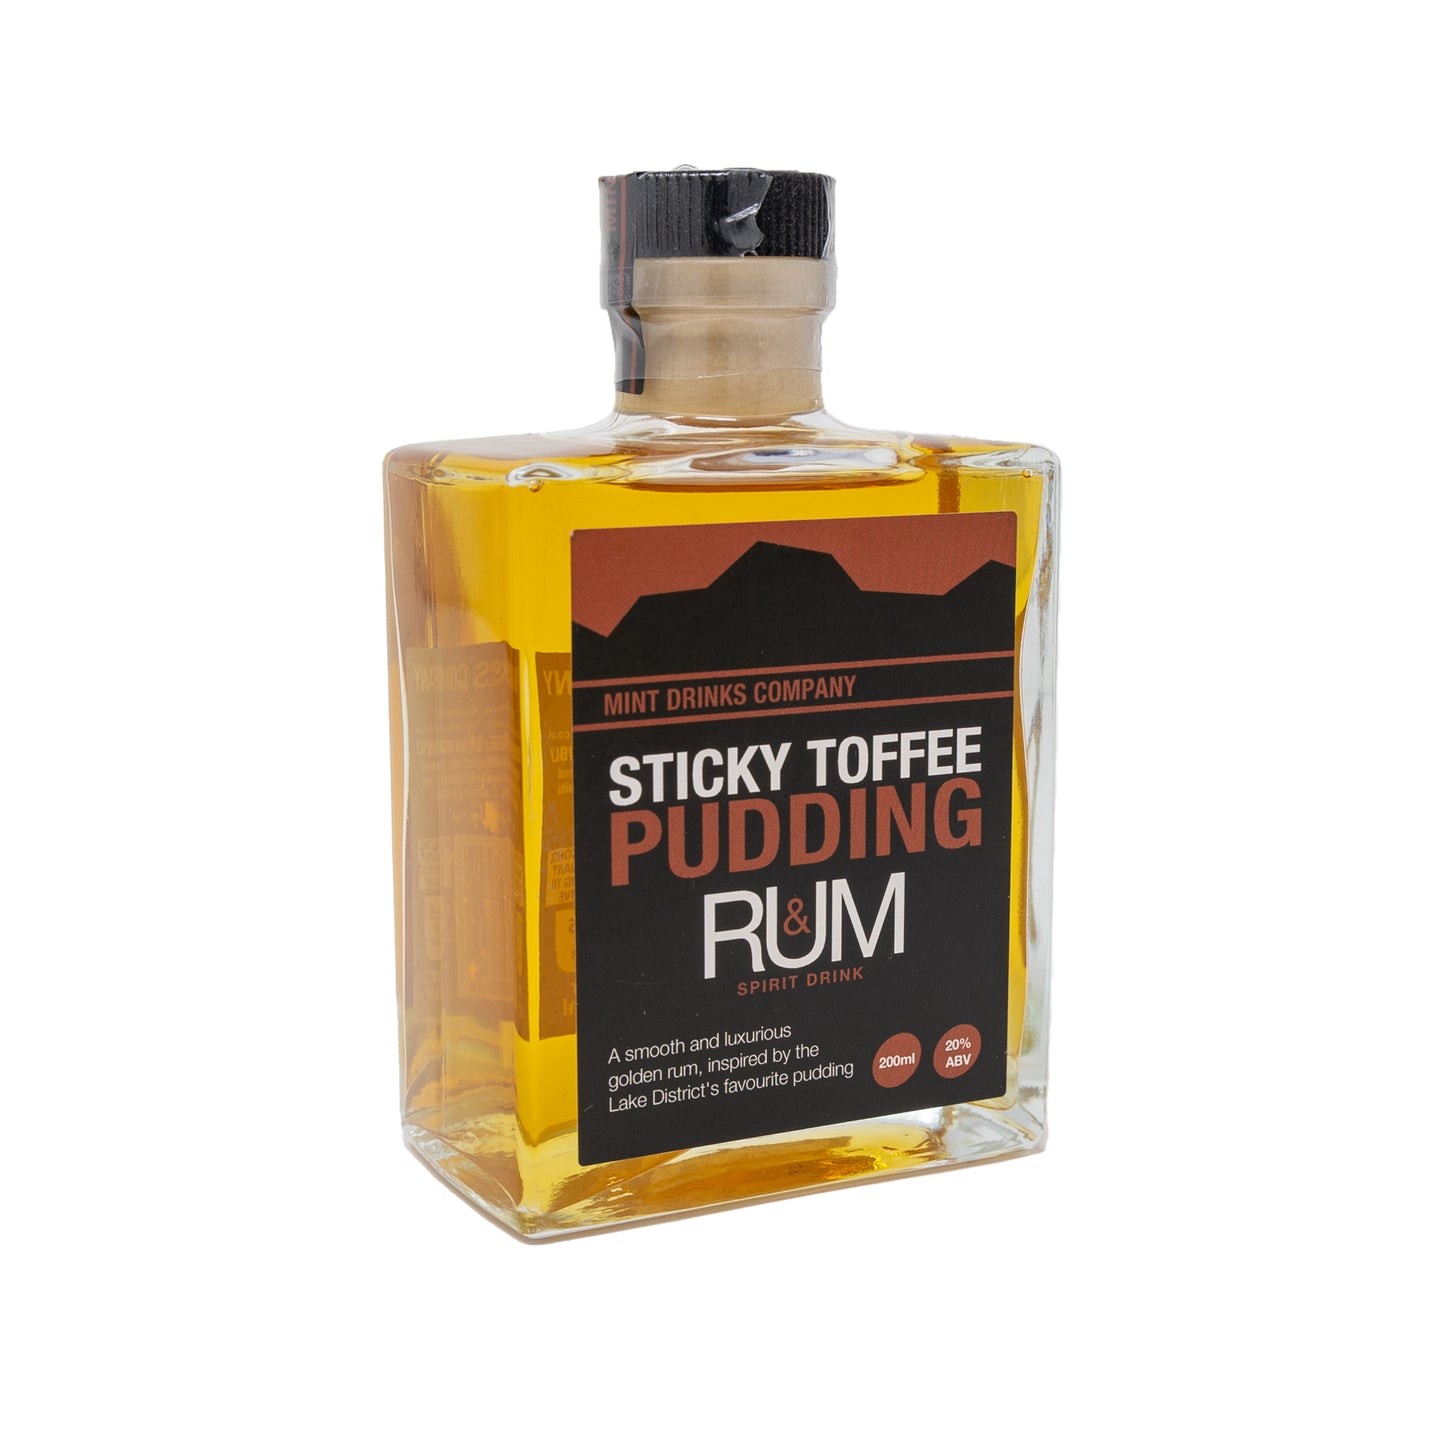 Mint Drinks Co. Sticky Toffee Pudding & Rum